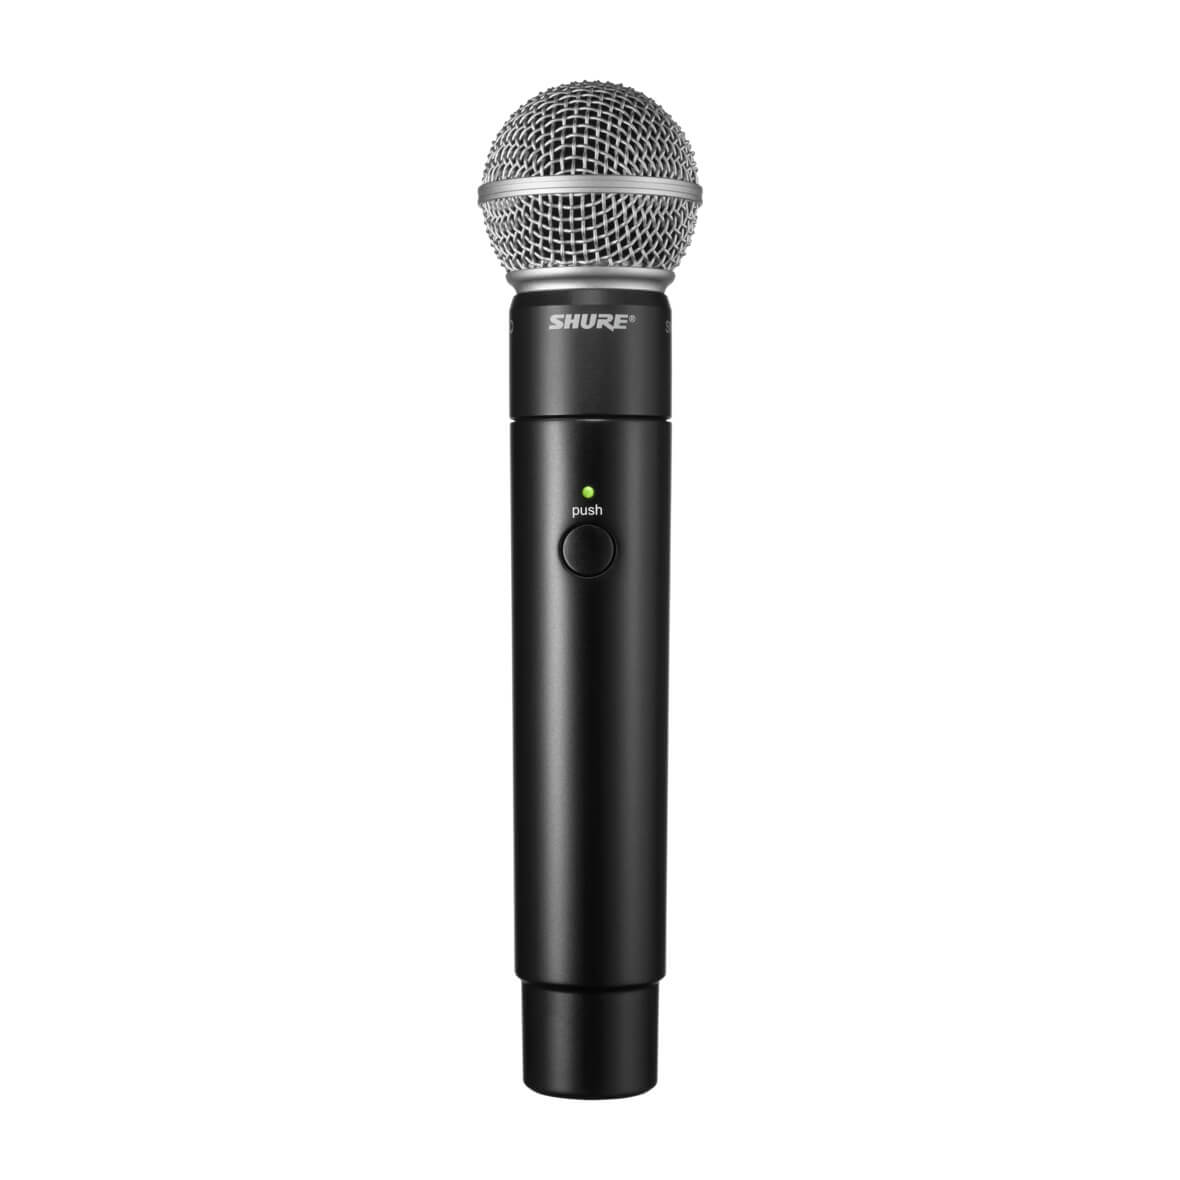 Shure MXW2/SM58 - Microflex Handheld Transmitter with SM58 Capsule